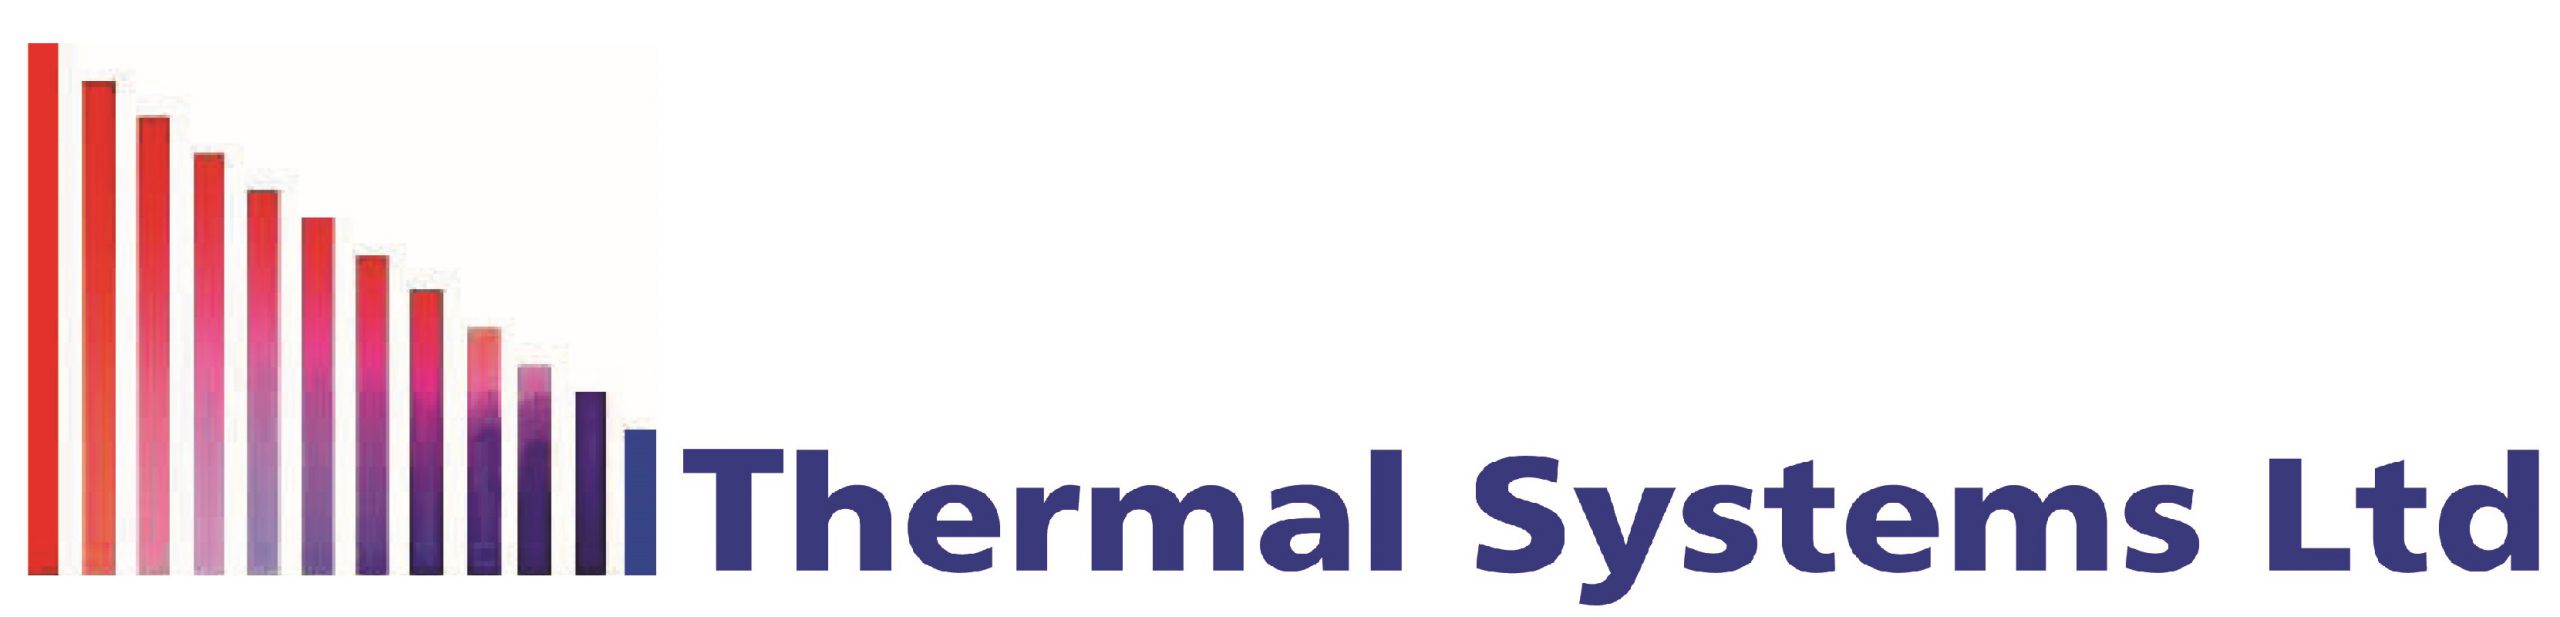 Thermal Systems Ltd